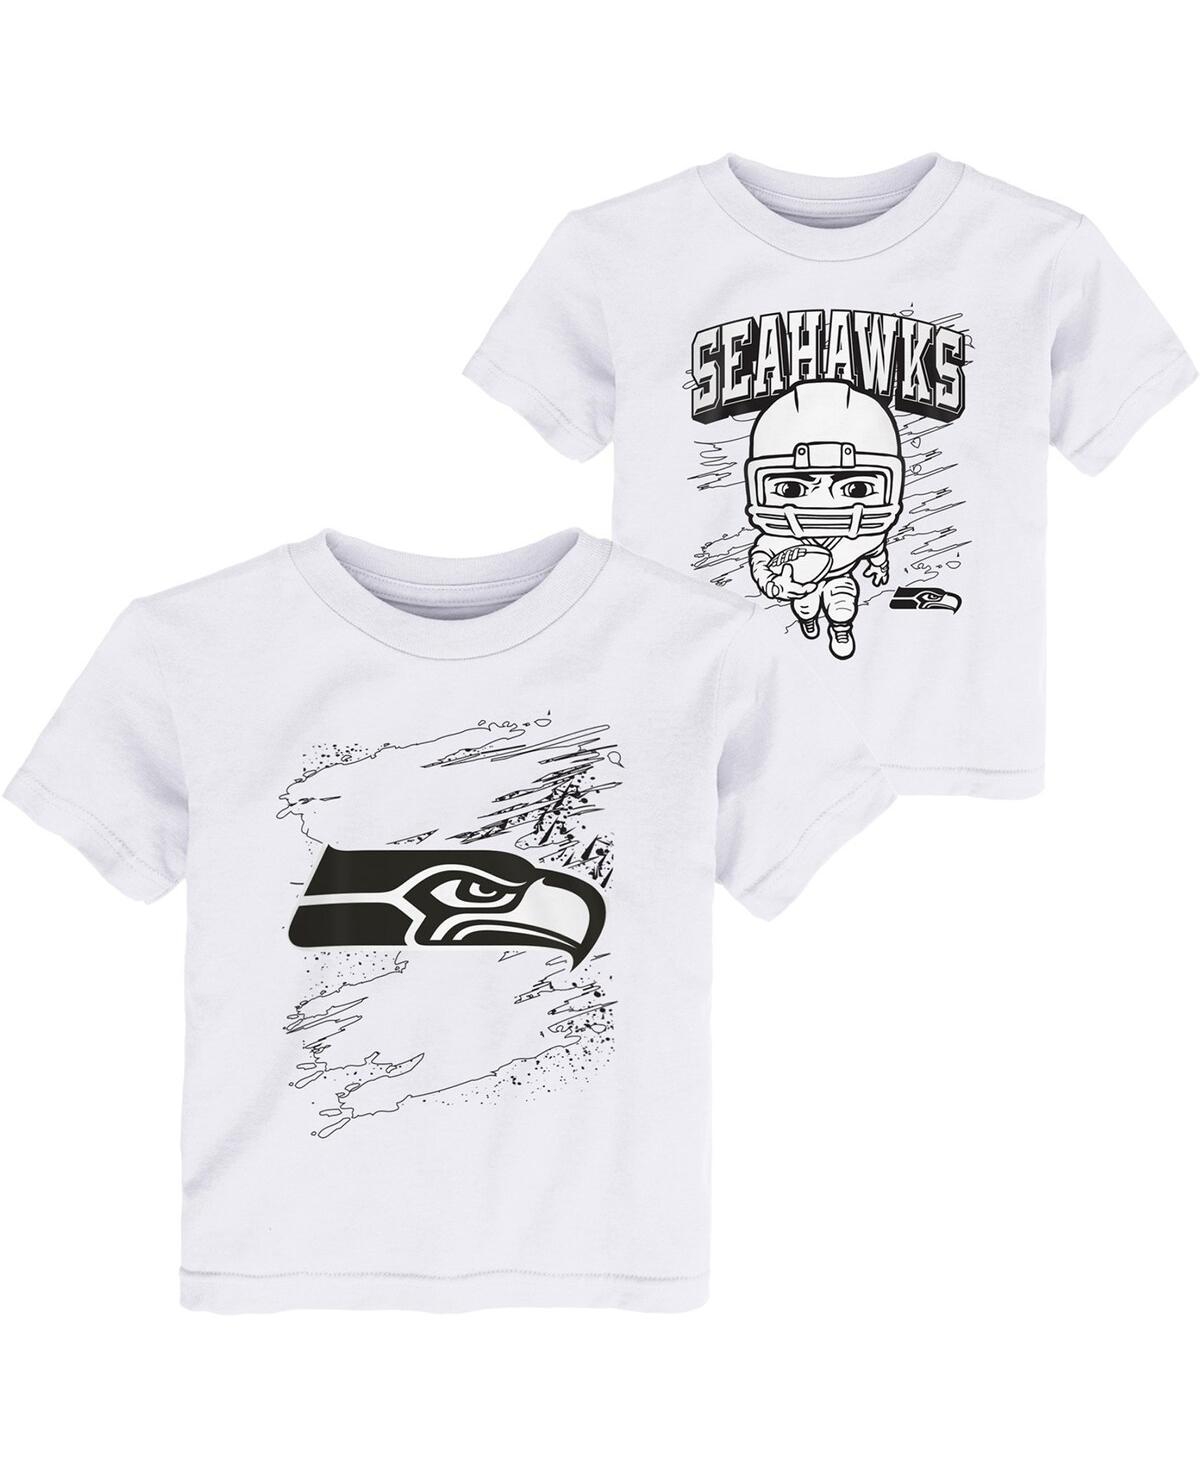 Outerstuff Babies' Toddler Boys White Seattle Seahawks Coloring Activity Two-pack T-shirt Set